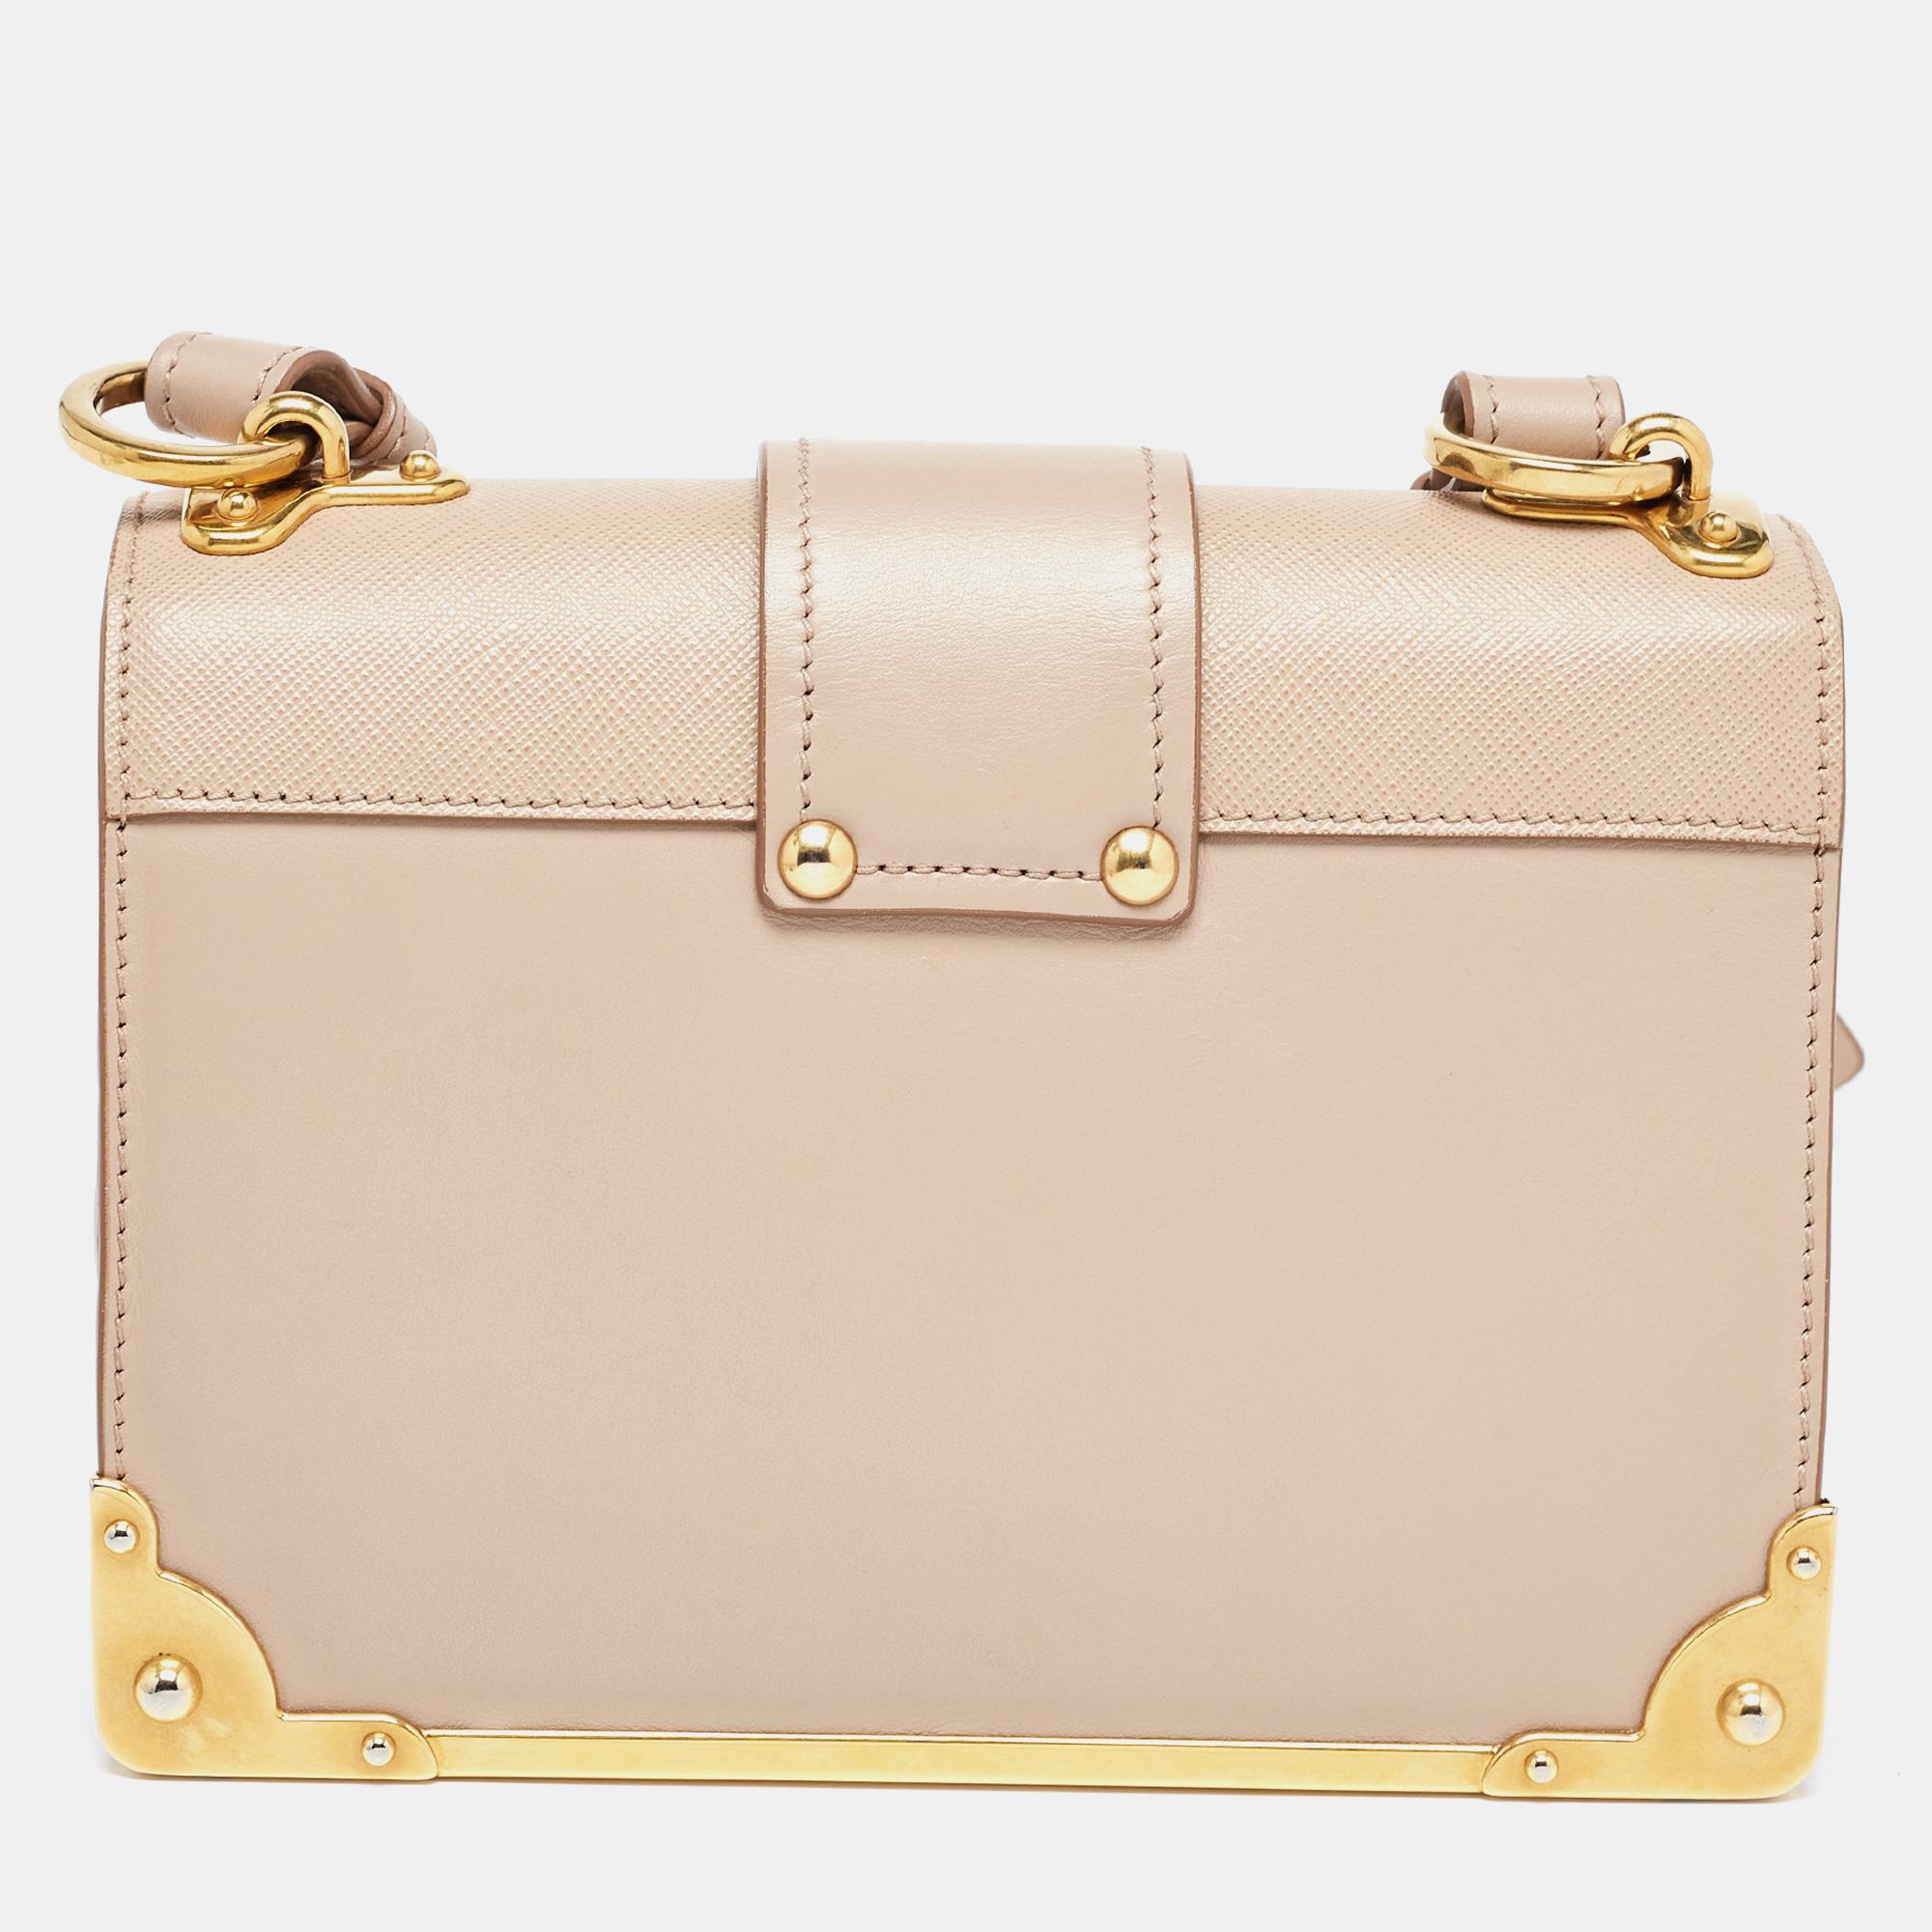 The Prada Cahier shoulder bag is an exquisite accessory, crafted from Saffiano and calf leather. Its structured silhouette features a distinctive metal logo embellishment, a flap closure, and a shoulder strap. This iconic design seamlessly blends